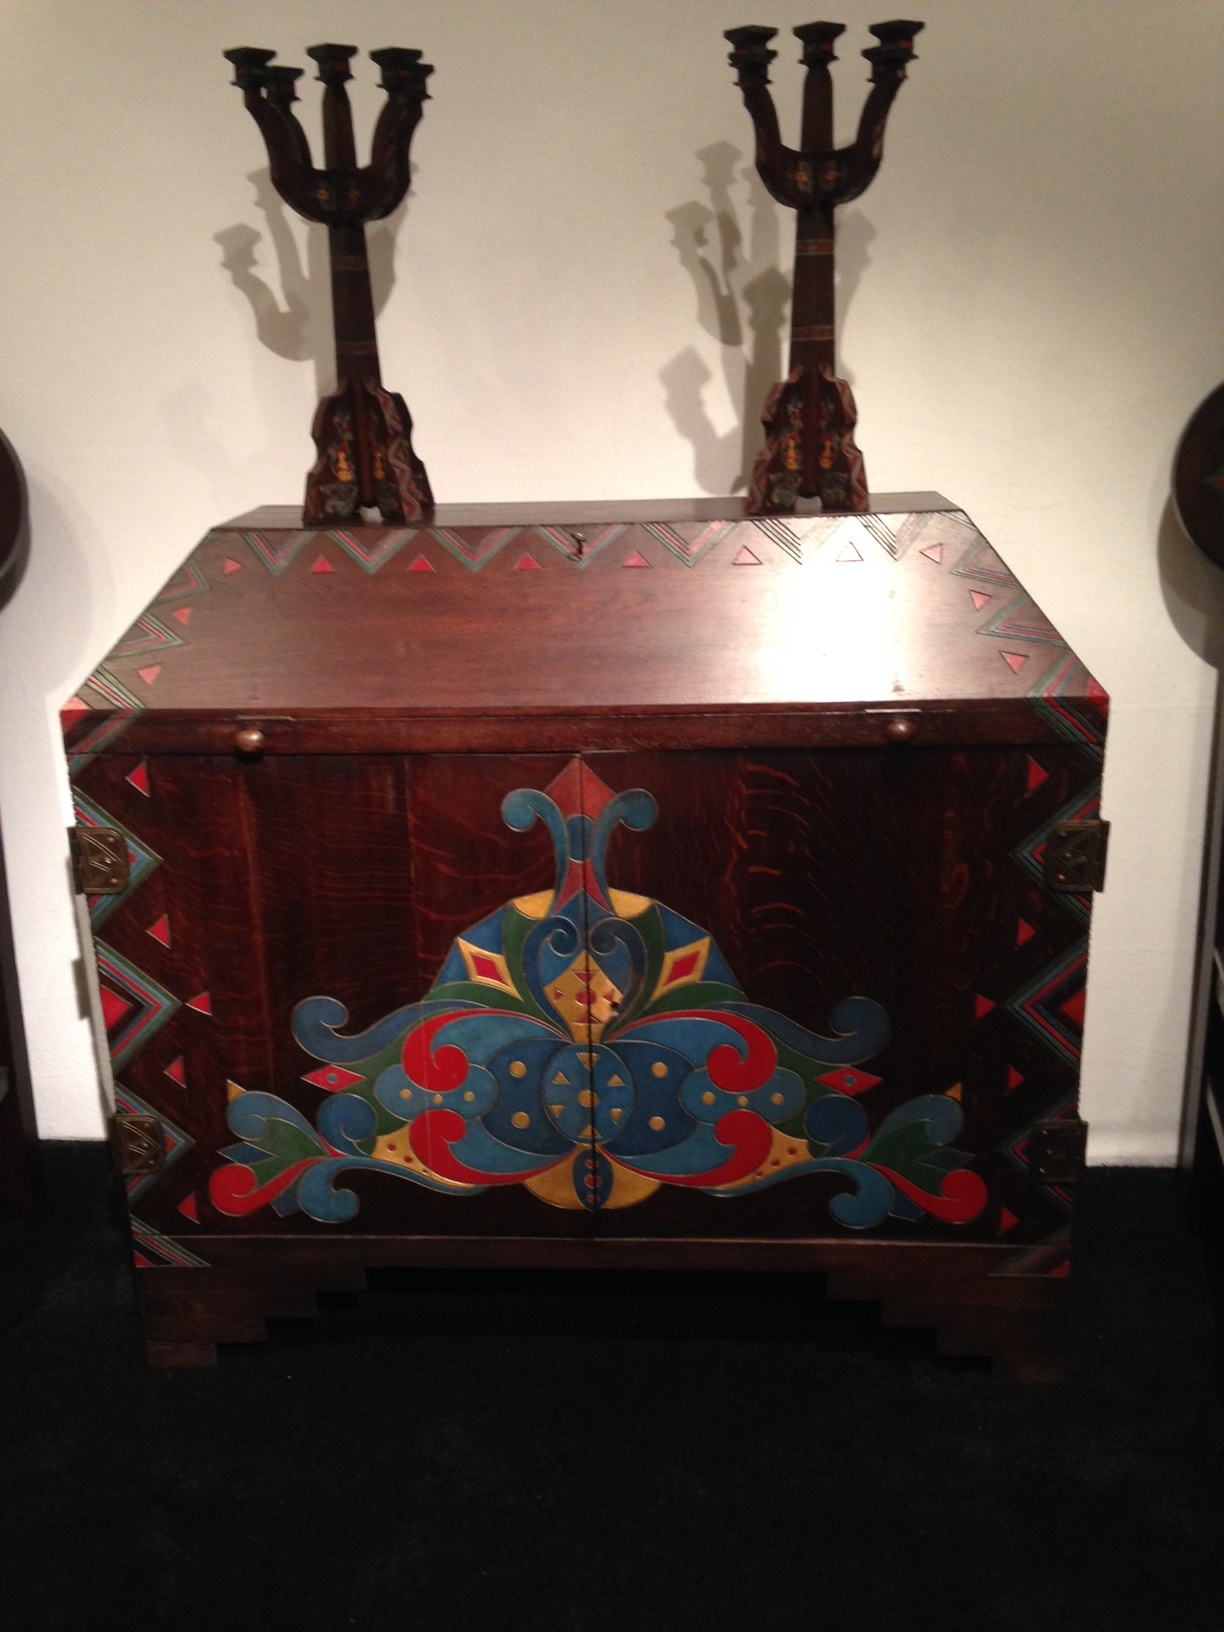 Anna Semenova, Hand-painted and hand-carved suite of furniture, ca. 1910's. The Russian-born Semenova is virtually unknown. This suit of furniture included a table with chairs, sideboards, and wall-mounted candelabras. The suite was designed for the artist's home Chateau de la Roche. Gallerie du Passage, Paris. 